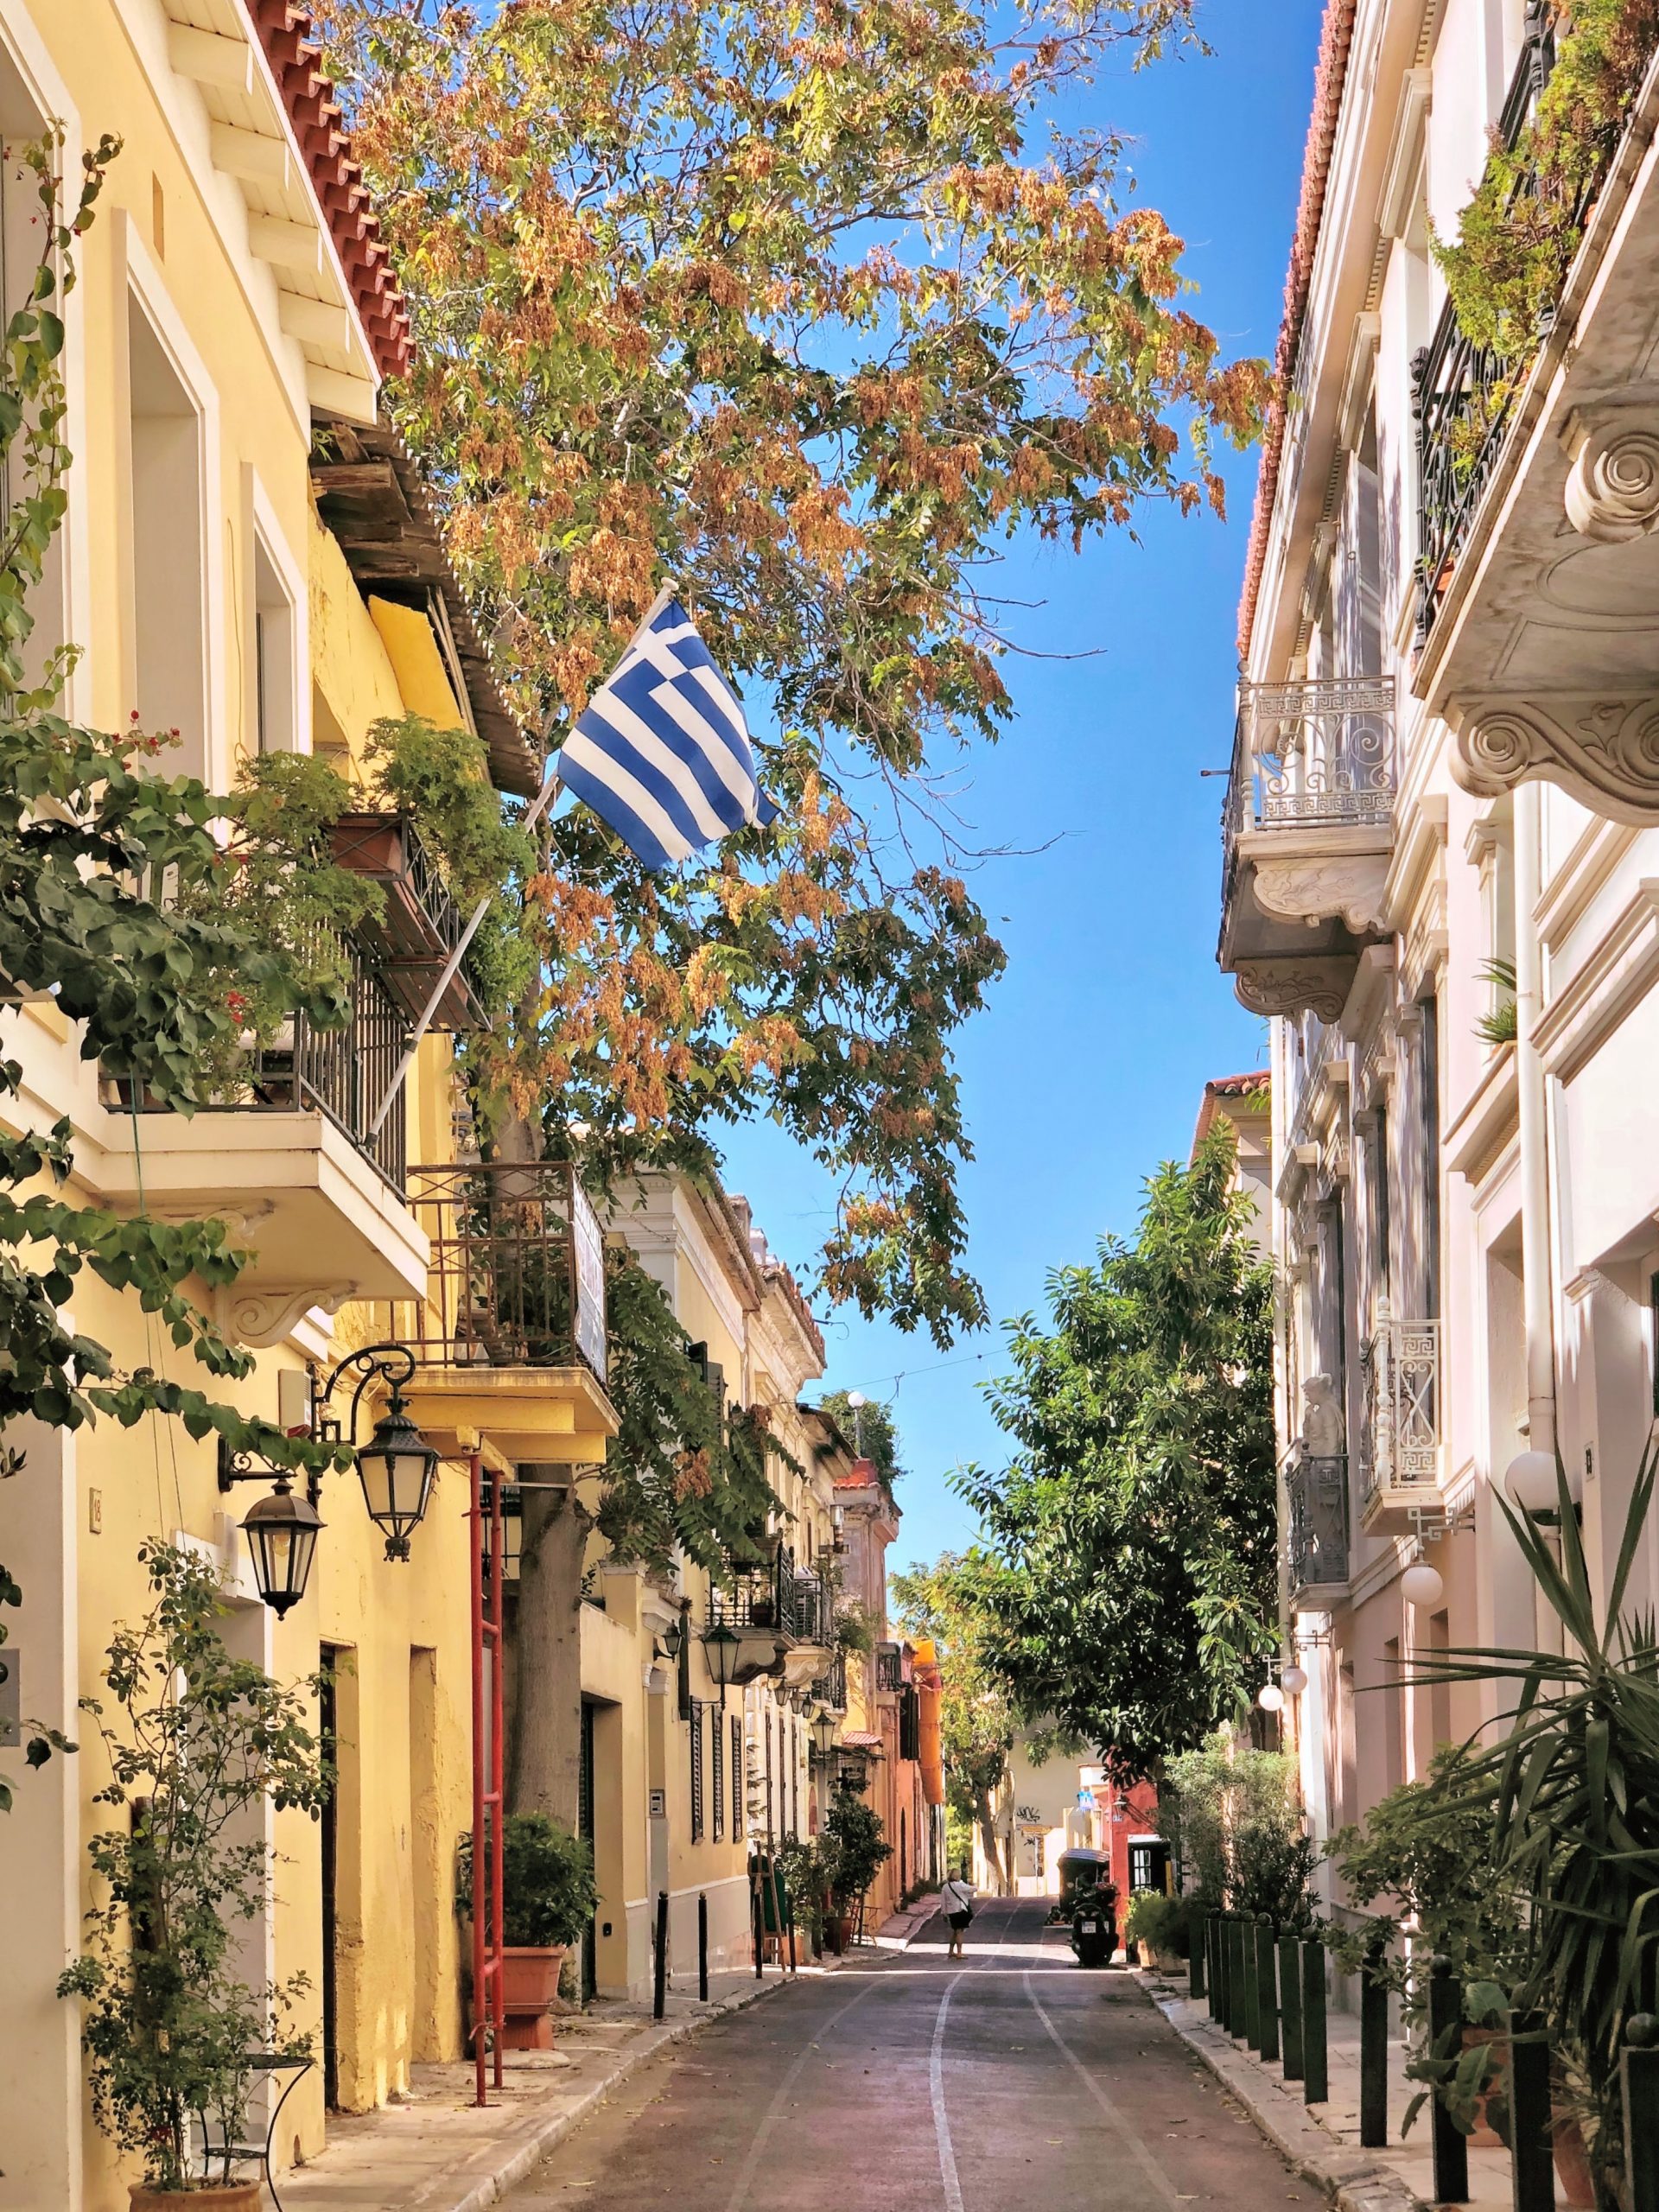 A residential alley blooming with greenery in Plaka, Athens, Greece.